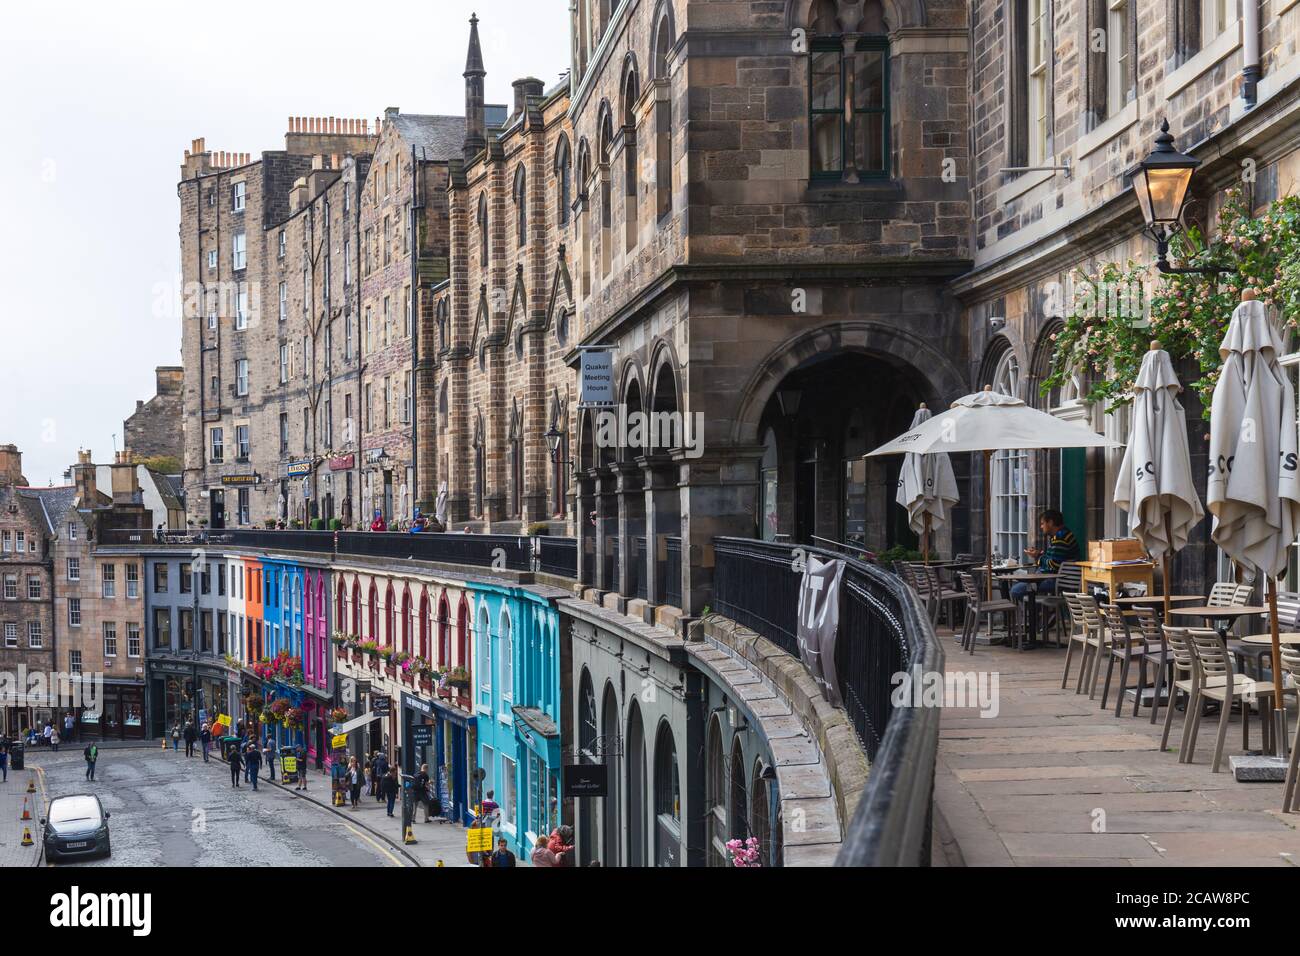 [Edinburgh, Scotland - Aug 2020] Edinburgh West Bow and Victoria Street with colorful shops in the Old Town Stock Photo